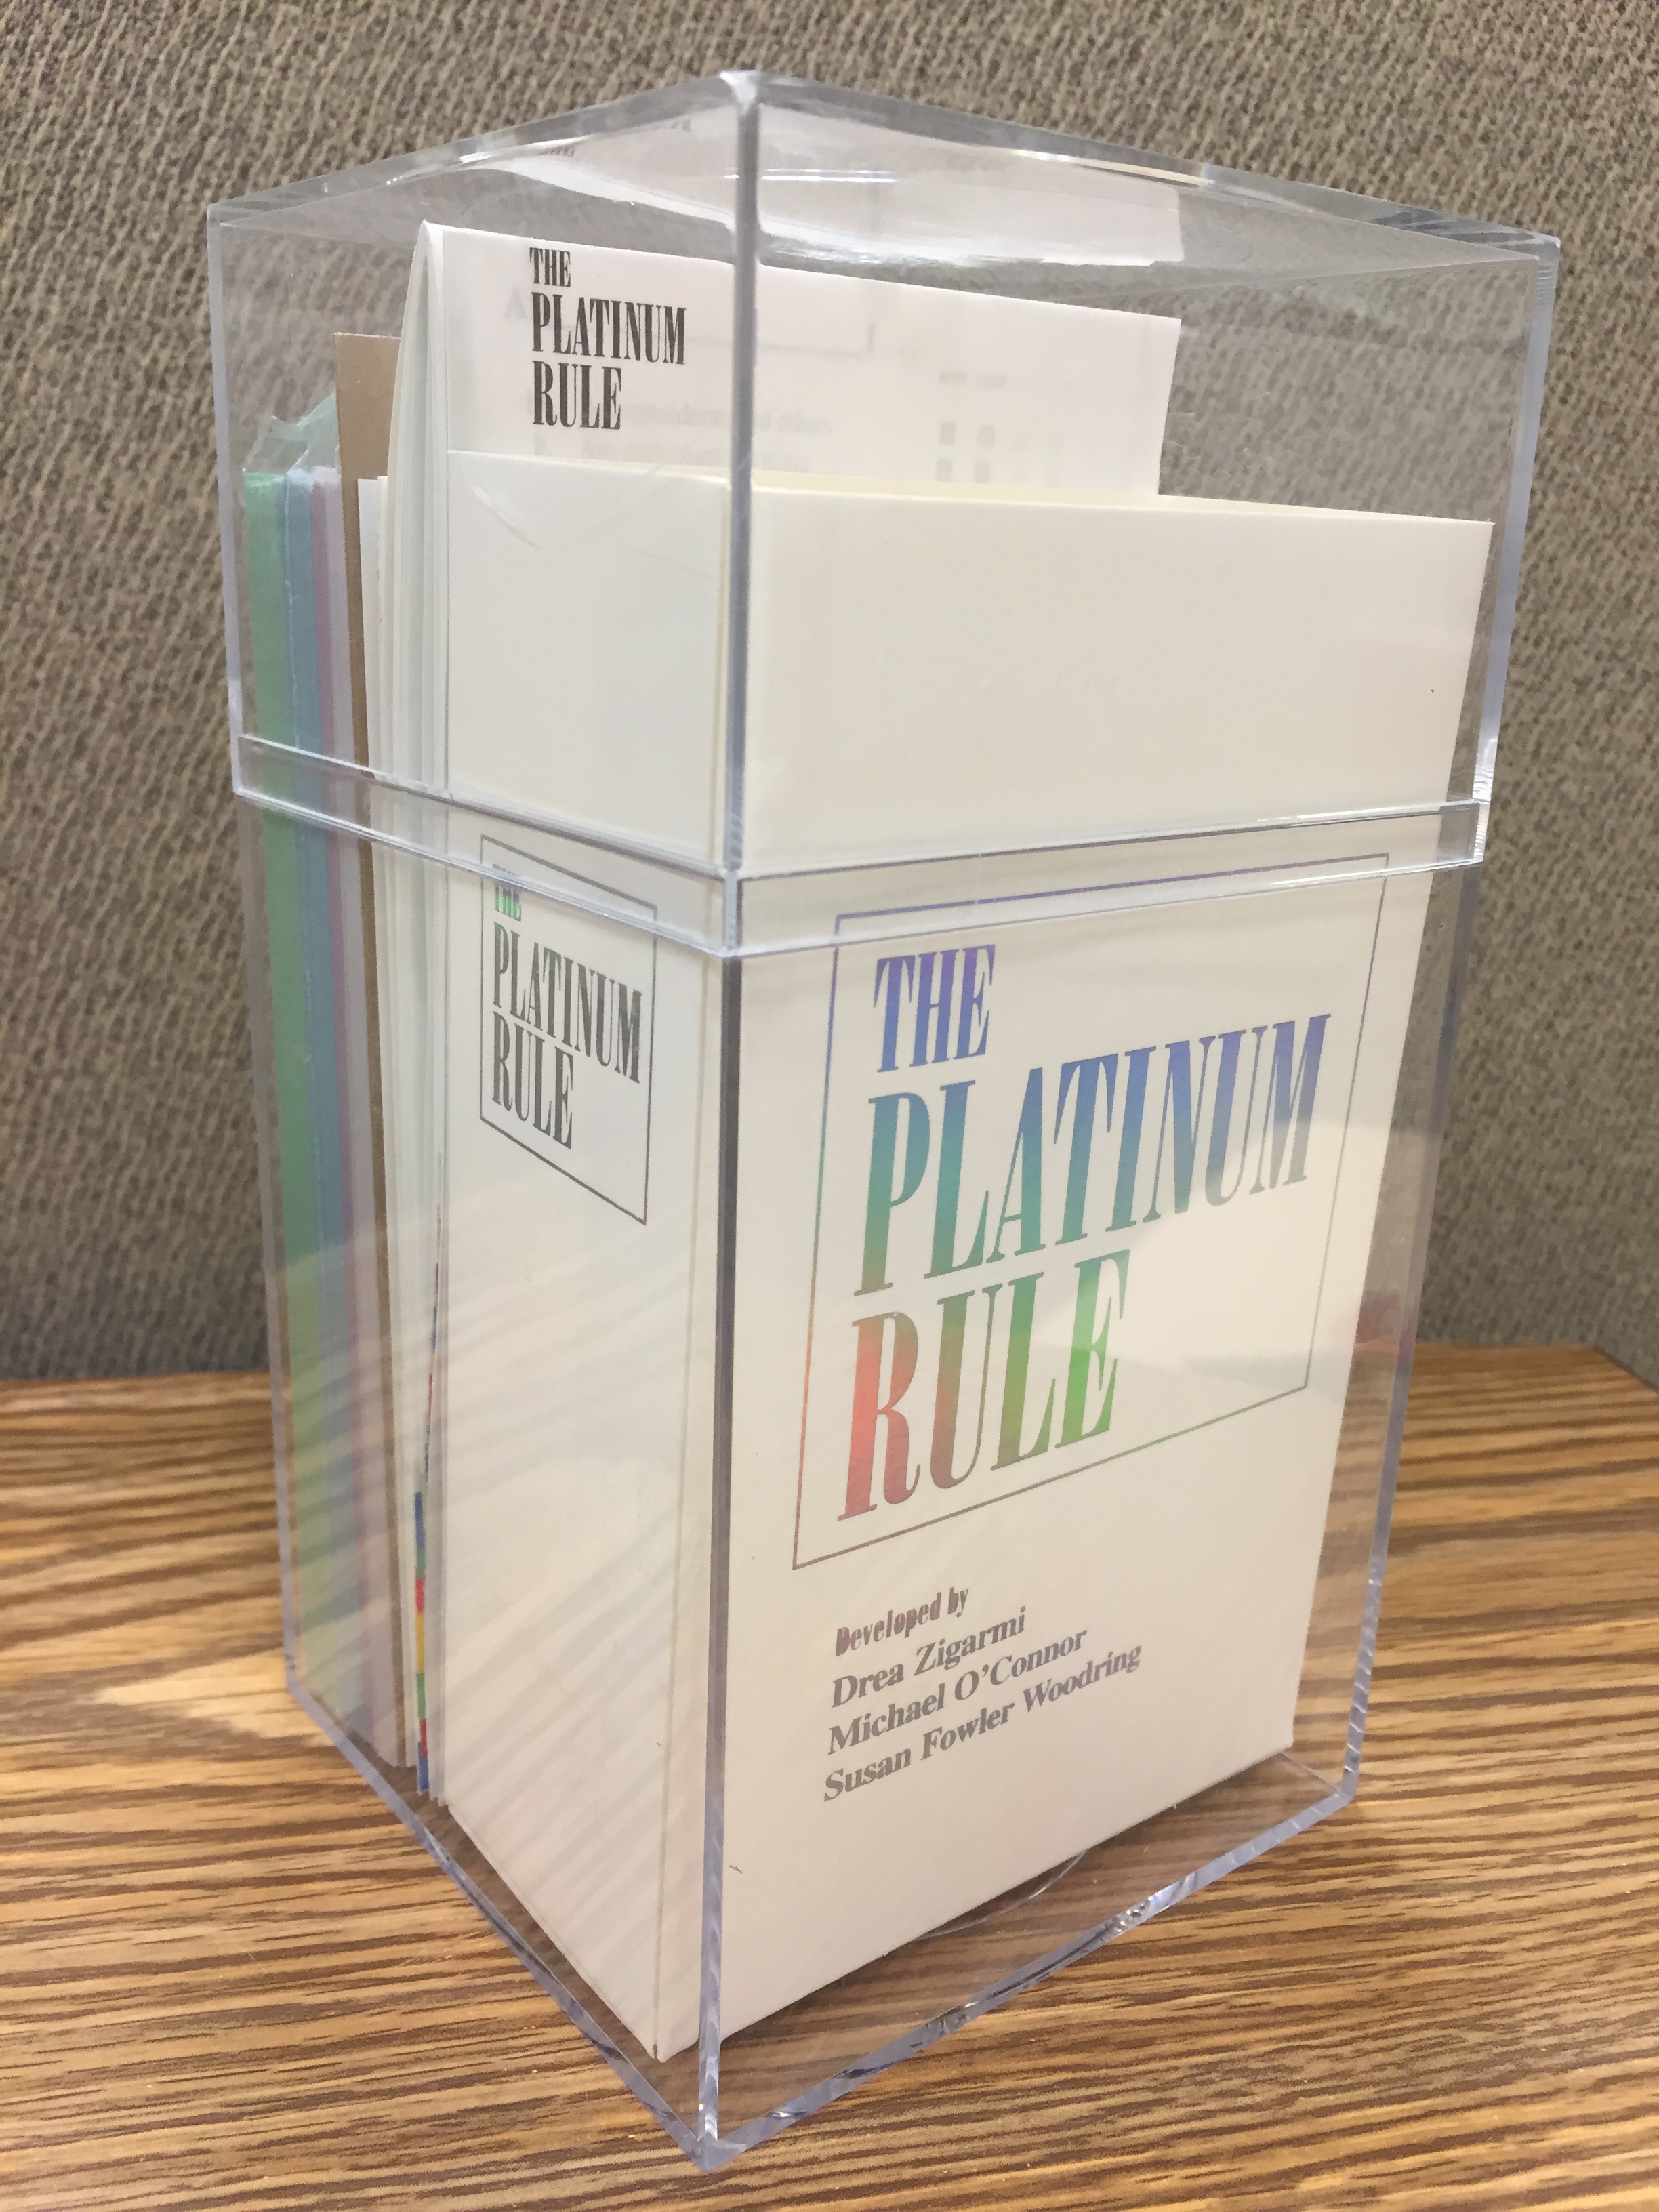 photo of platinum rule toolbox - acrylic box with color-coded cards inside